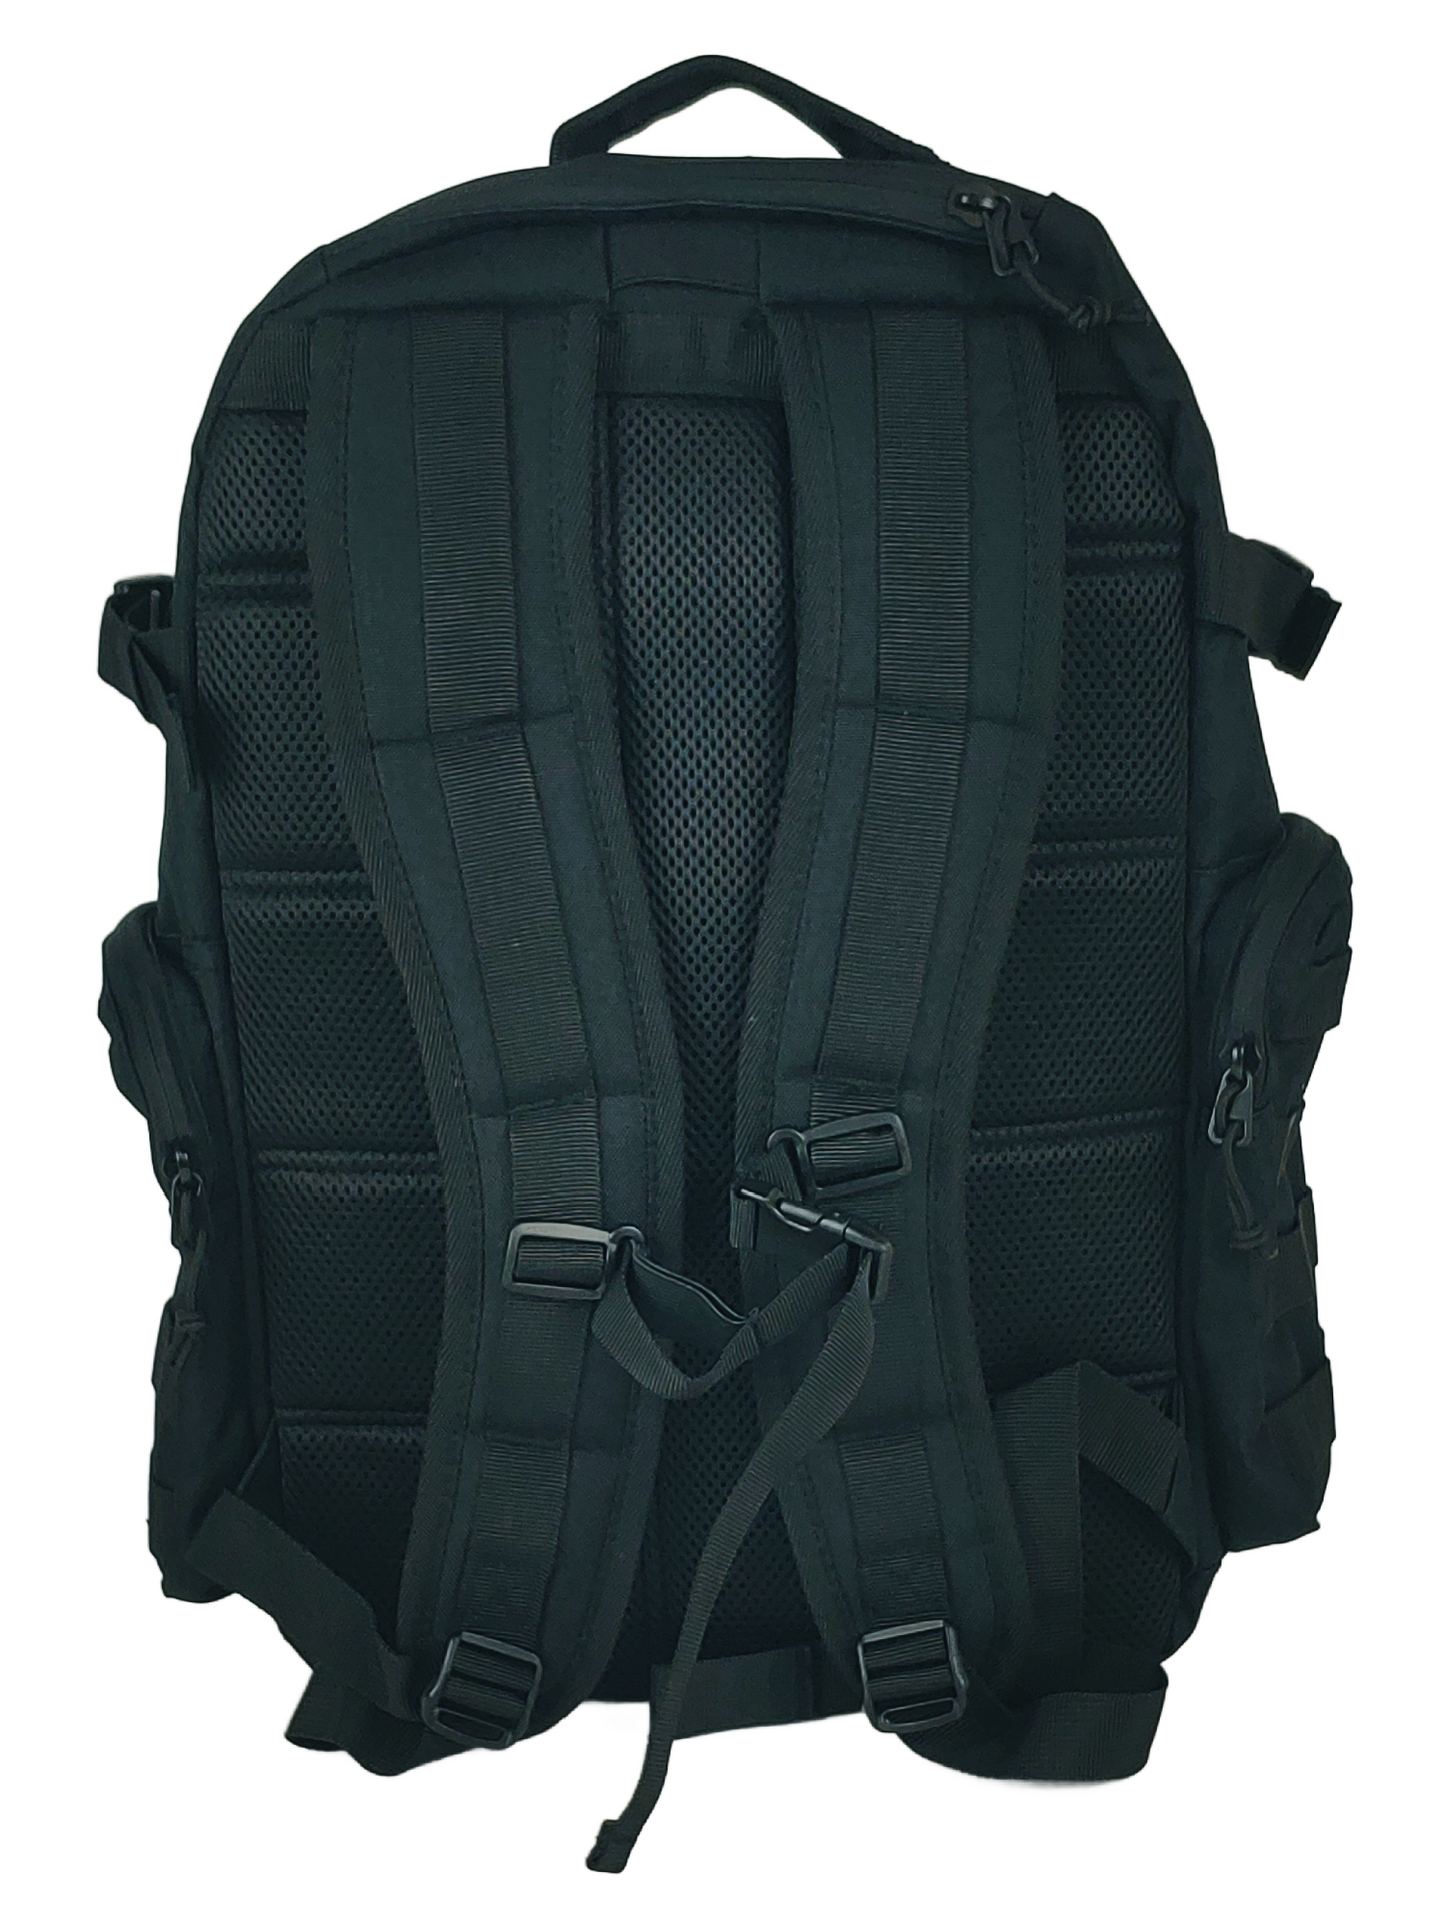 World of Concrete - CornerStone® Black Tactical Backpack with WOC Patch